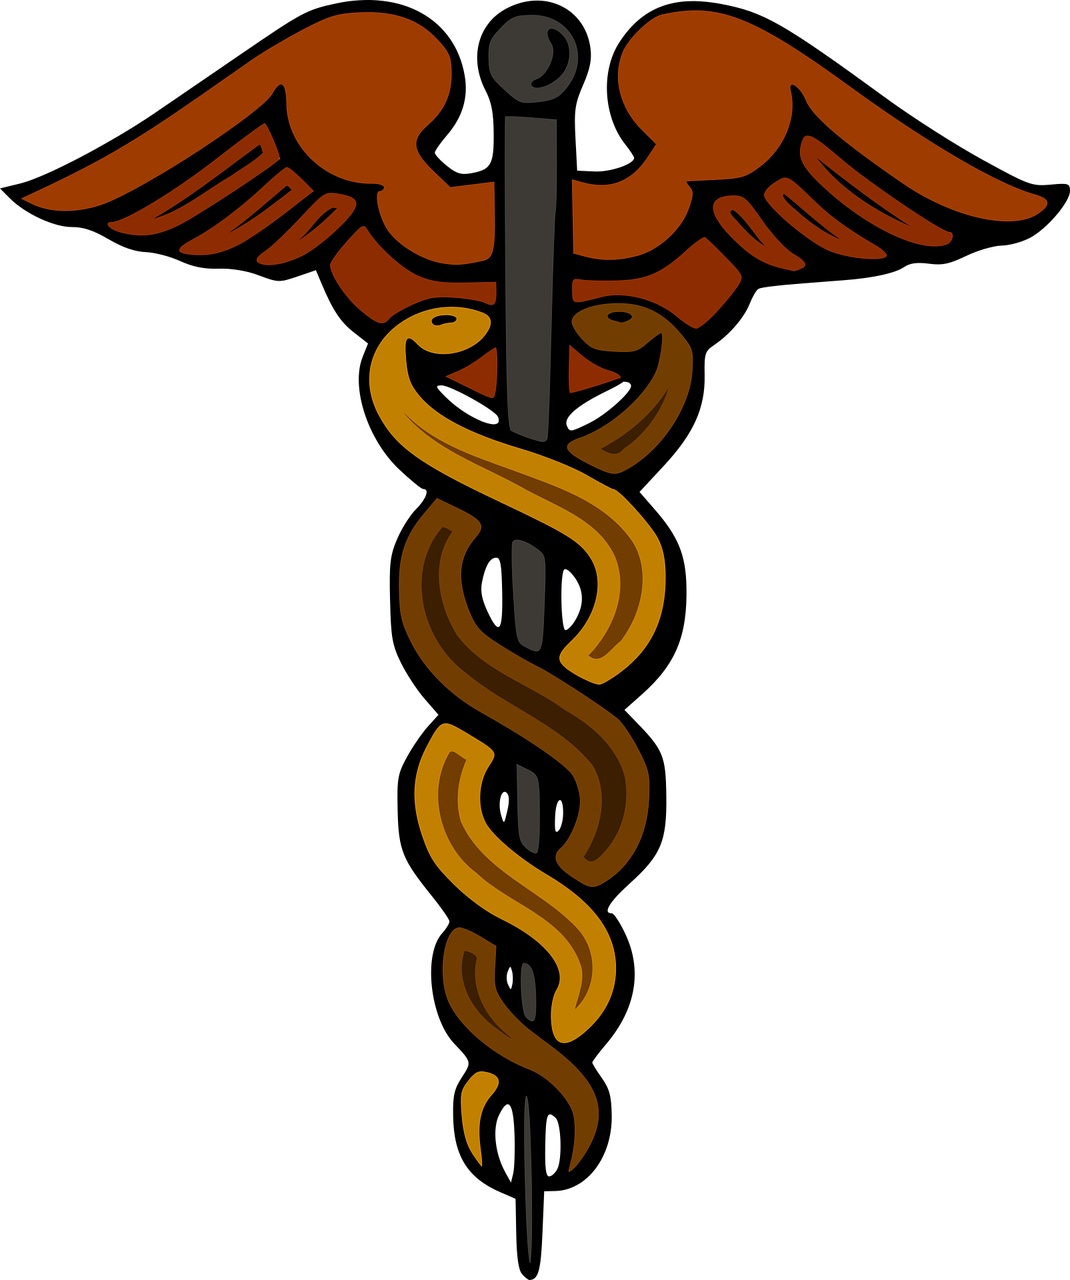 What Is The Medical Staff And Snake Symbol - Snake Poin